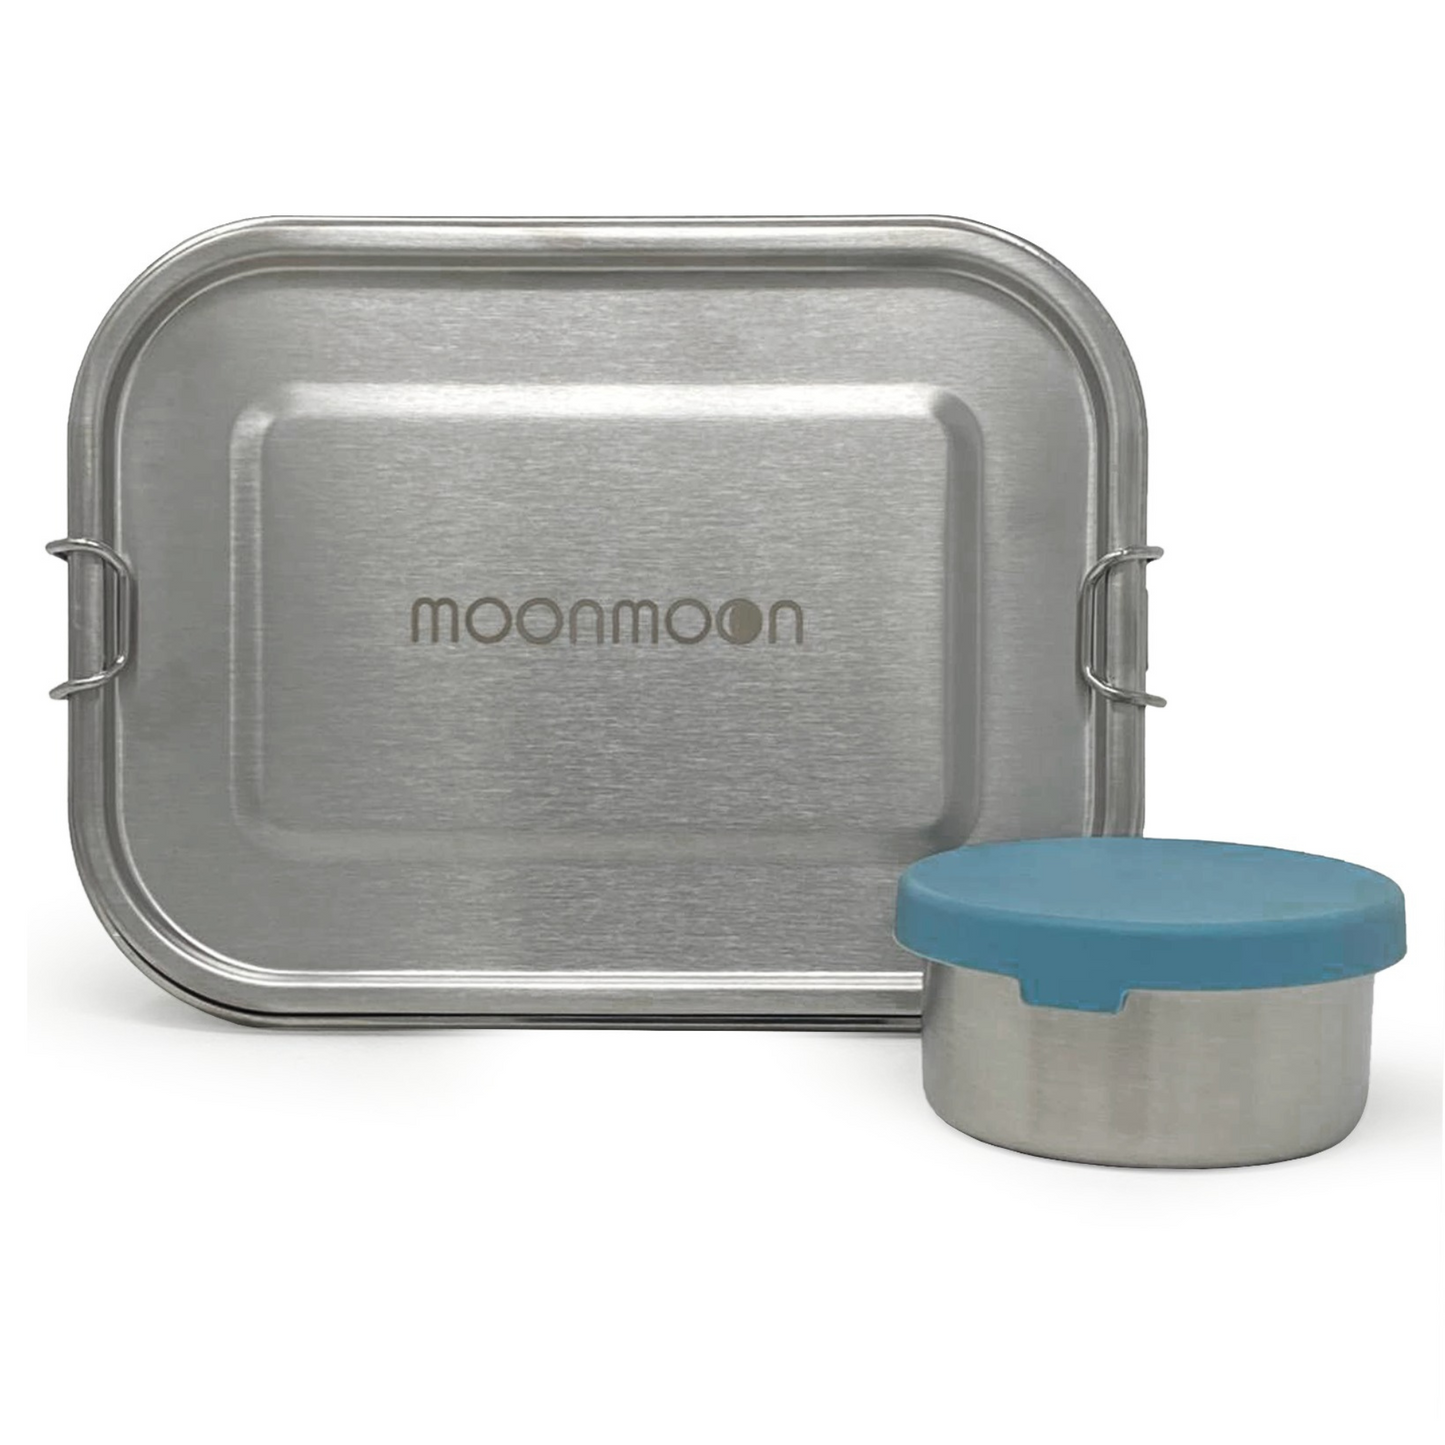 Load image into Gallery viewer, adult lunch box bento box bento boxes bento lunchbox stainless steel, metal lunch box, Minitie, Black &amp;amp; Blum, Elephant Box, stainless steel lunch box, metal food storage containers, stainless steel snack pots, stainless steel food containers, moonmoon, moonmoon uk, moommoom
